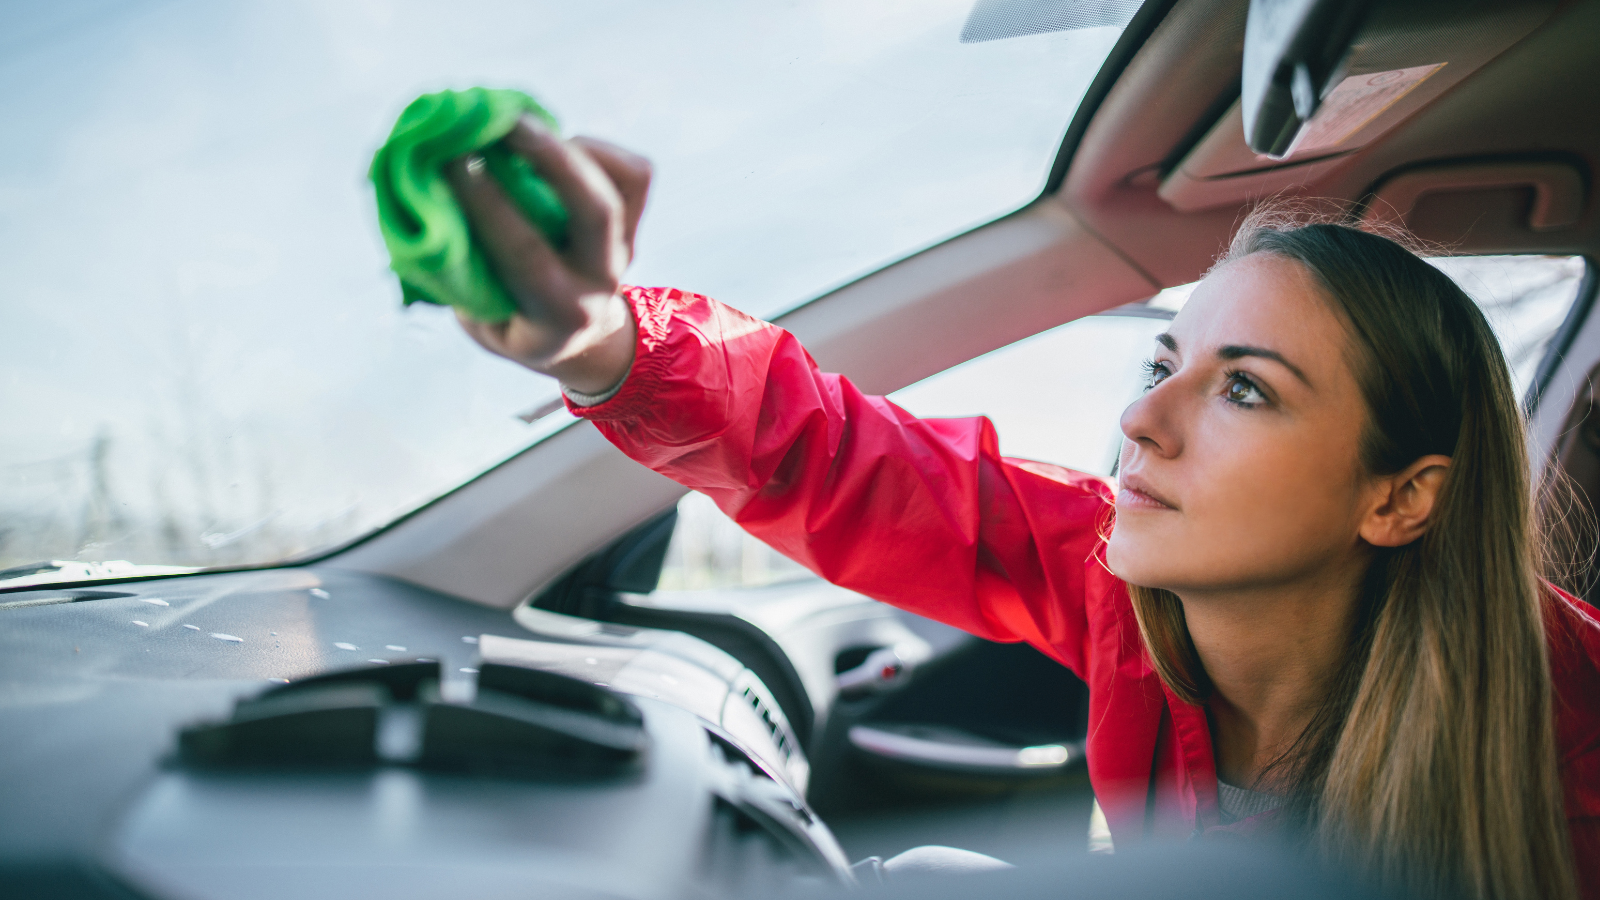 Keep your cars clean with EverWash!